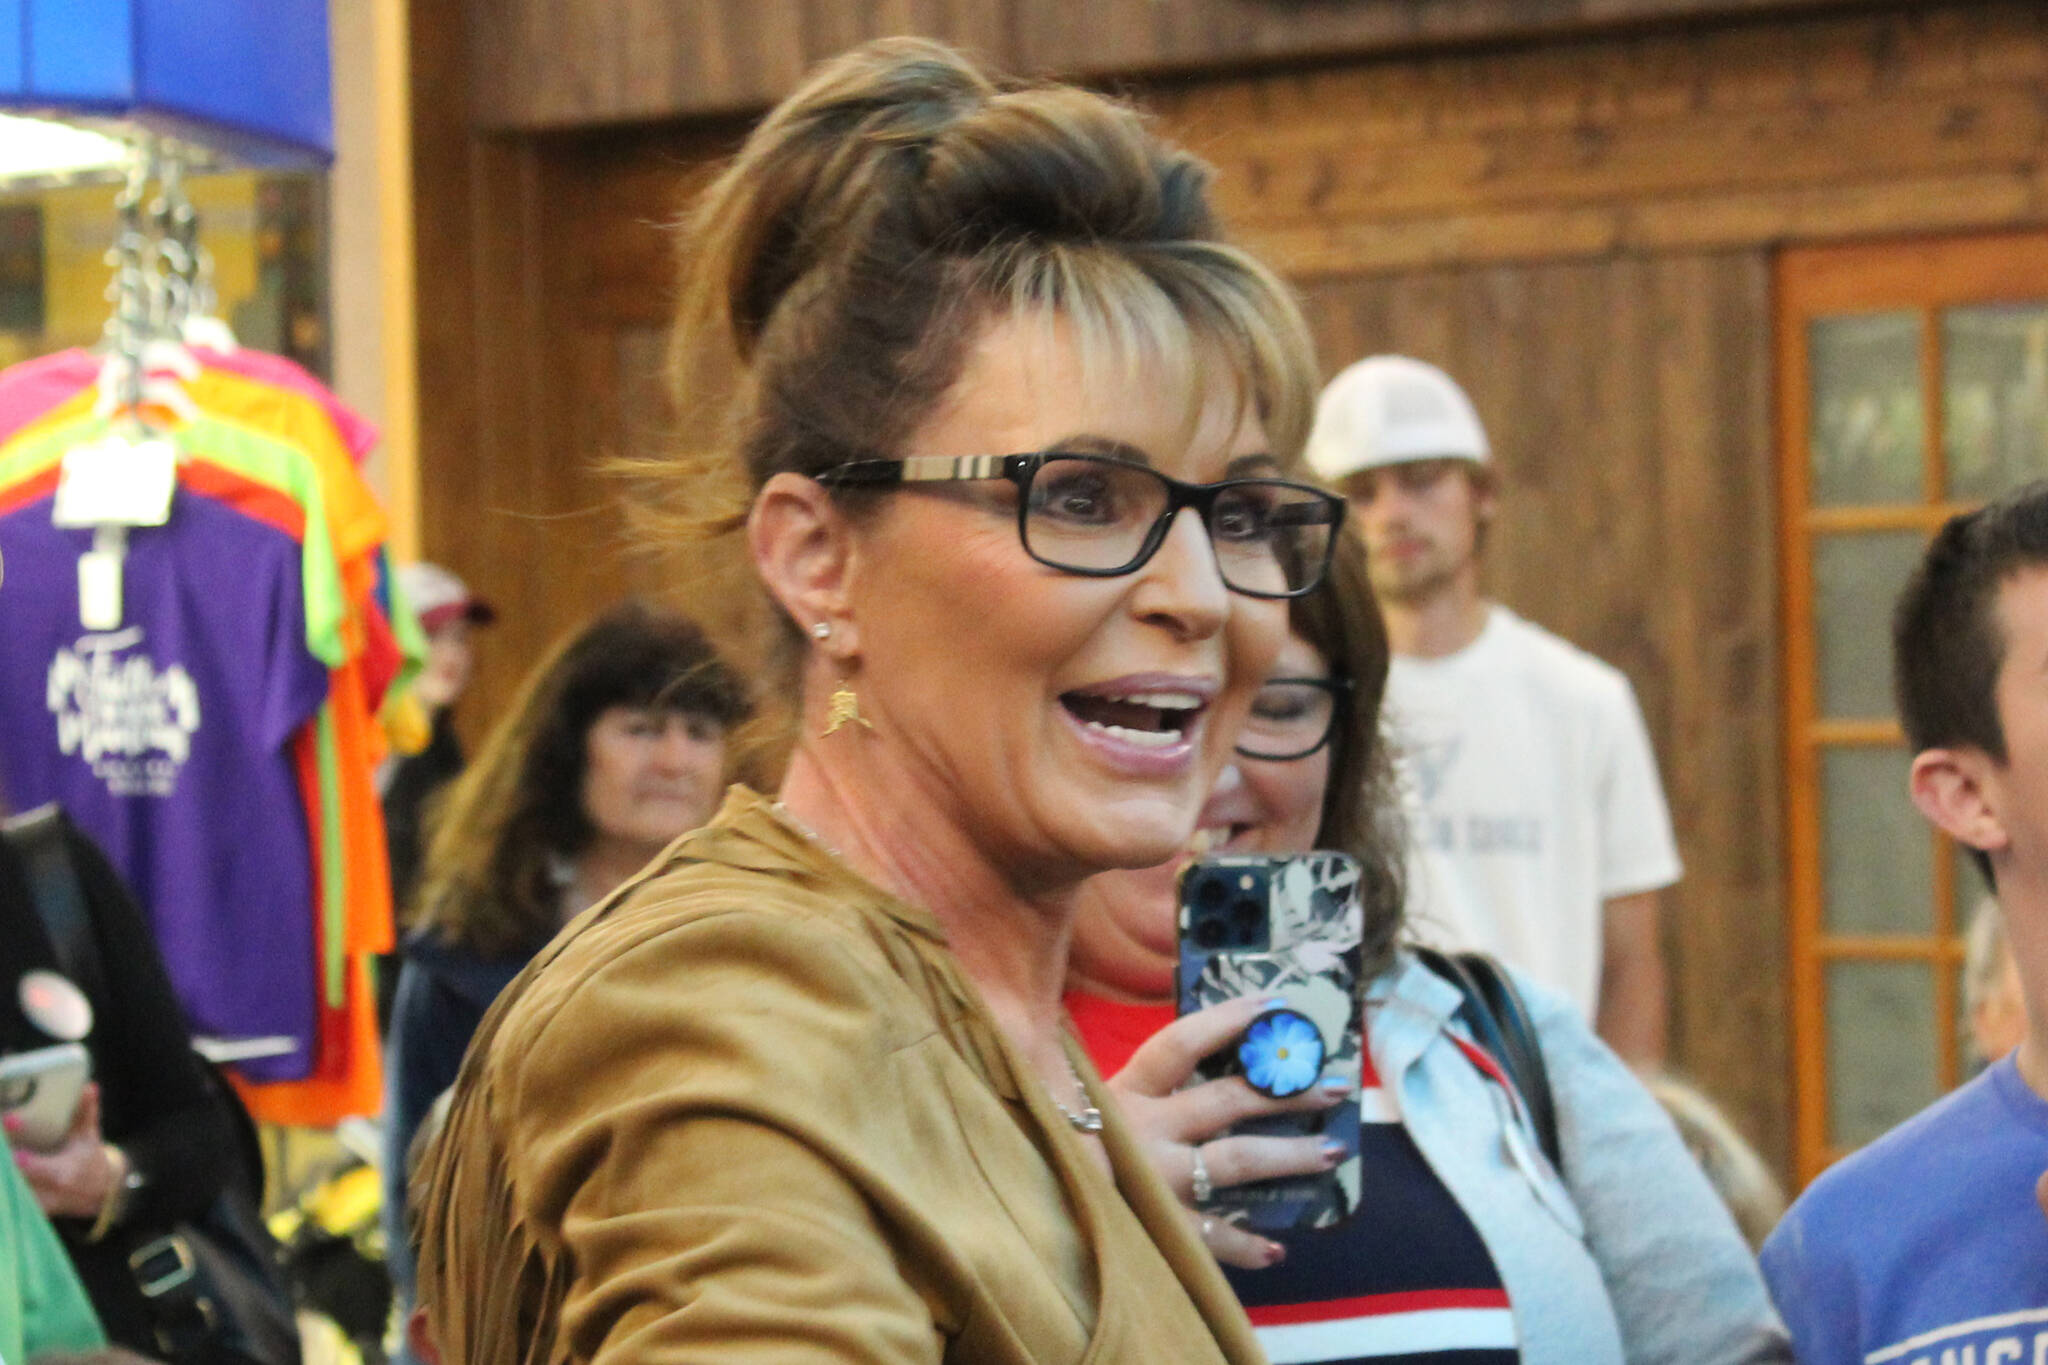 Former Alaska Gov. and current congressional hopeful Sarah Palin speaks with attendees at a meet and greet event outside of Ginger’s Restaurant on Saturday, May 14, 2022, in Soldotna, Alaska. (Ashlyn O’Hara/Peninsula Clarion)